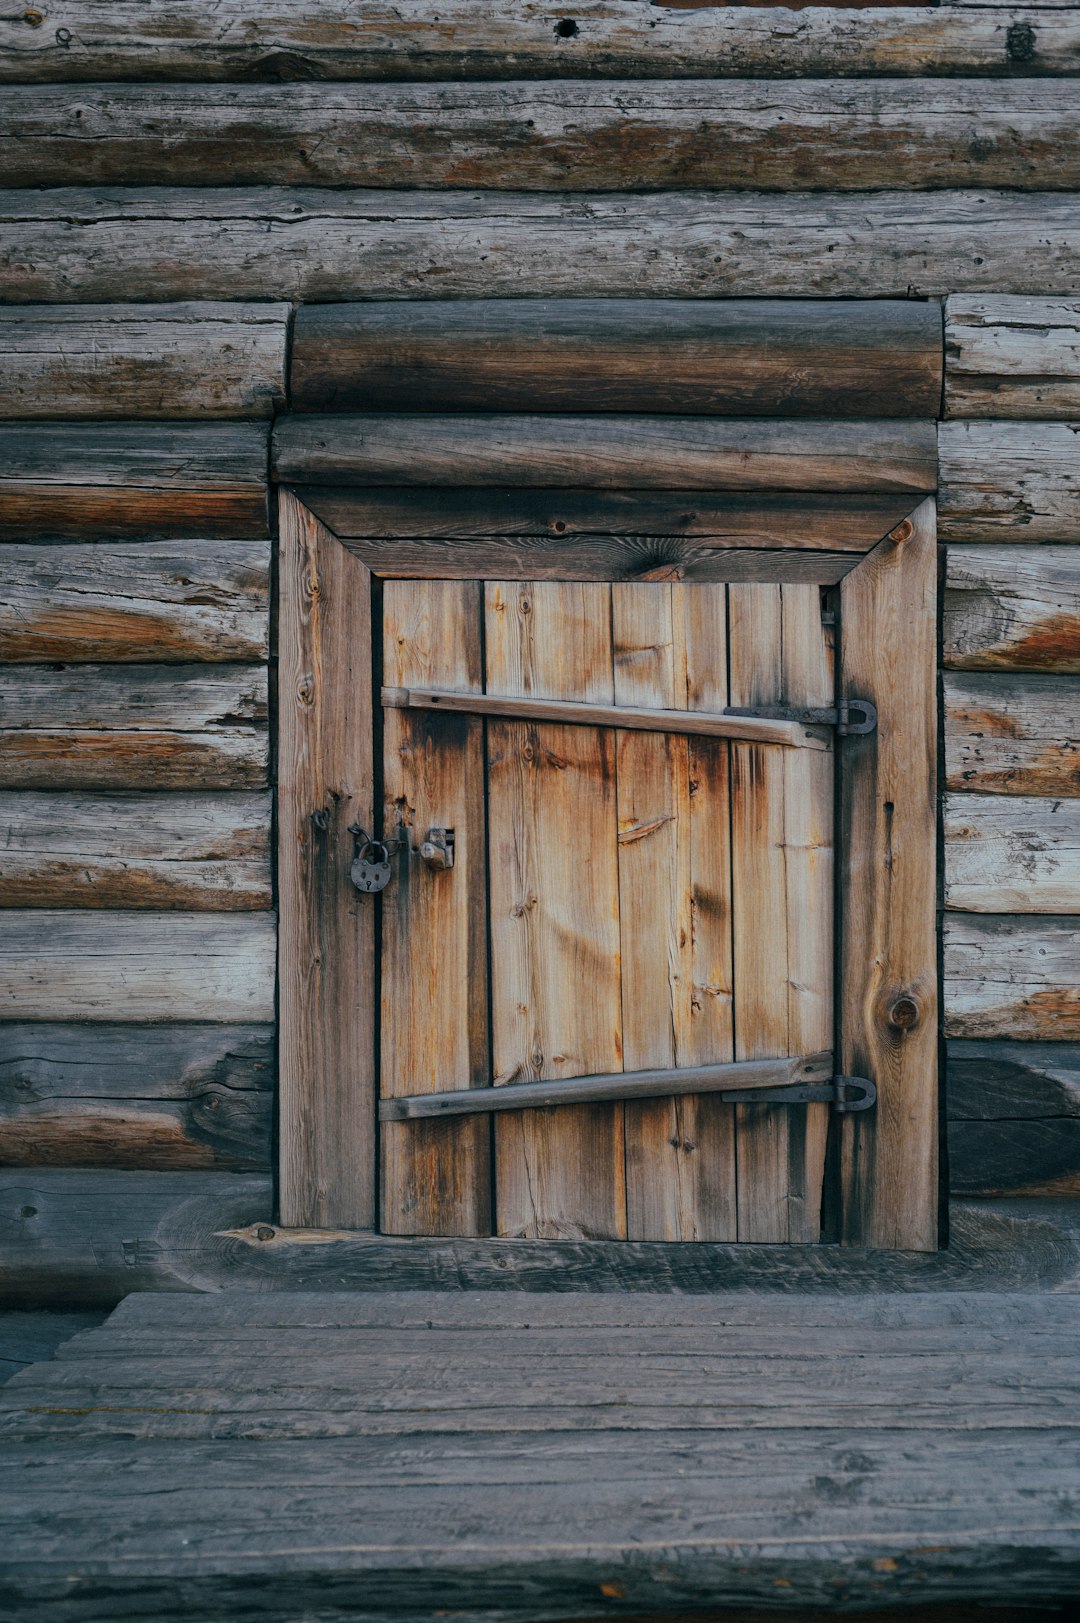 A closed door to an old Russian wooden building.